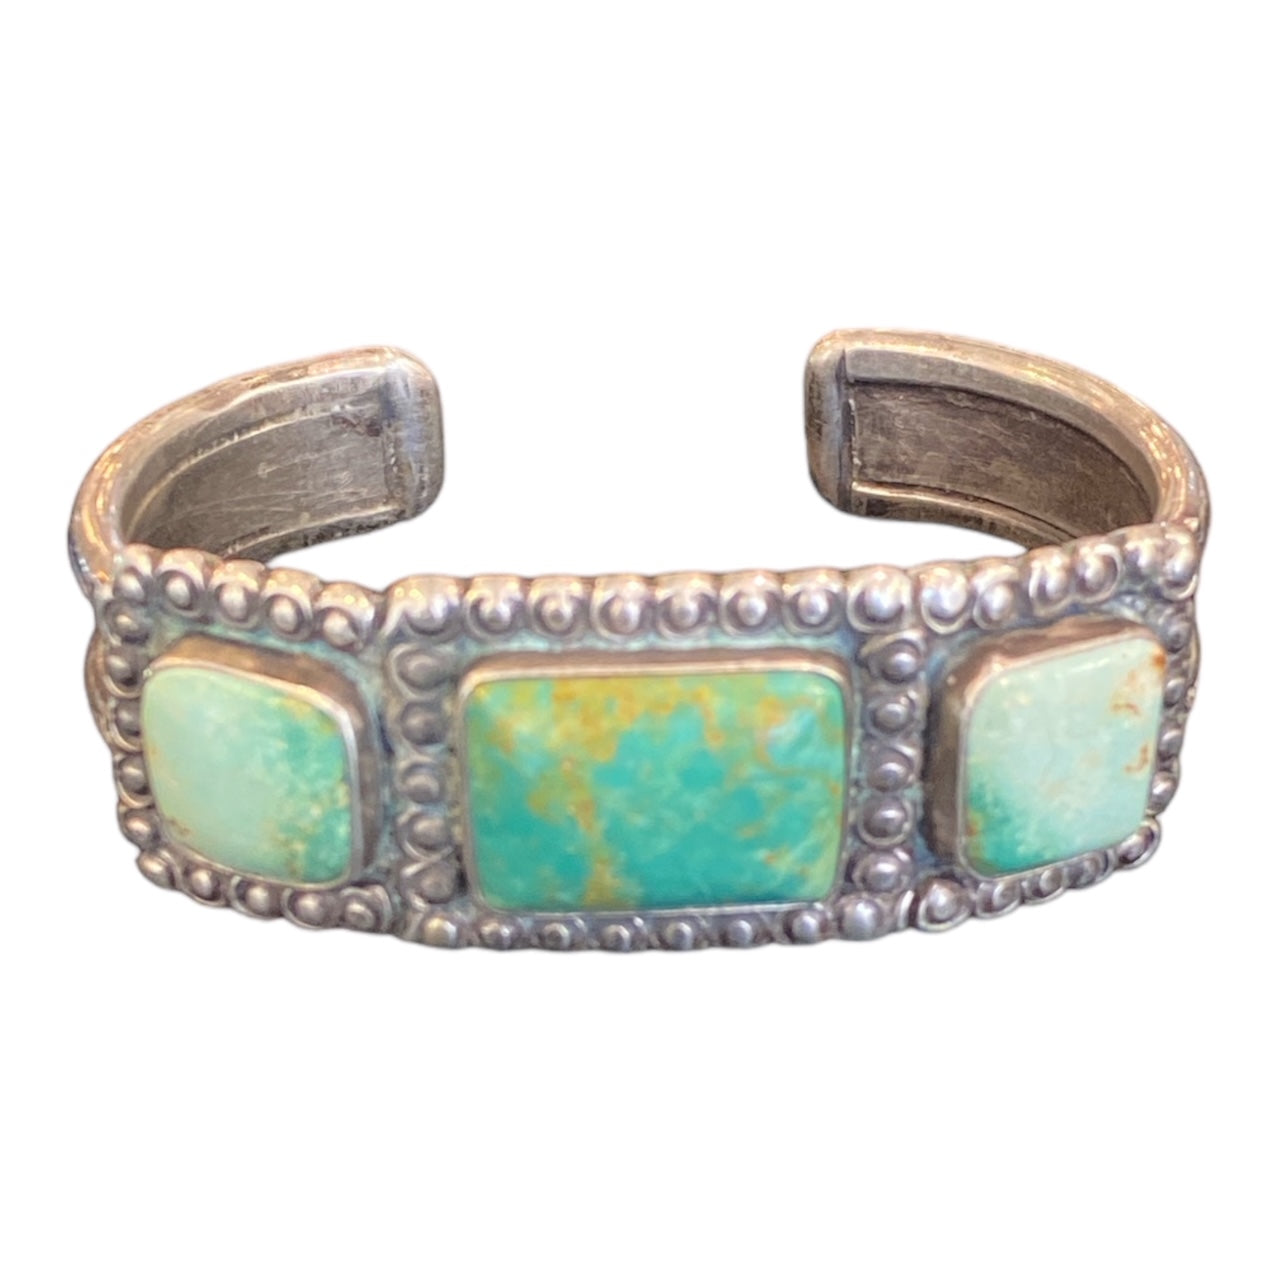 Vintage Navajo Jewelry, old pawn, turquoise, telluride